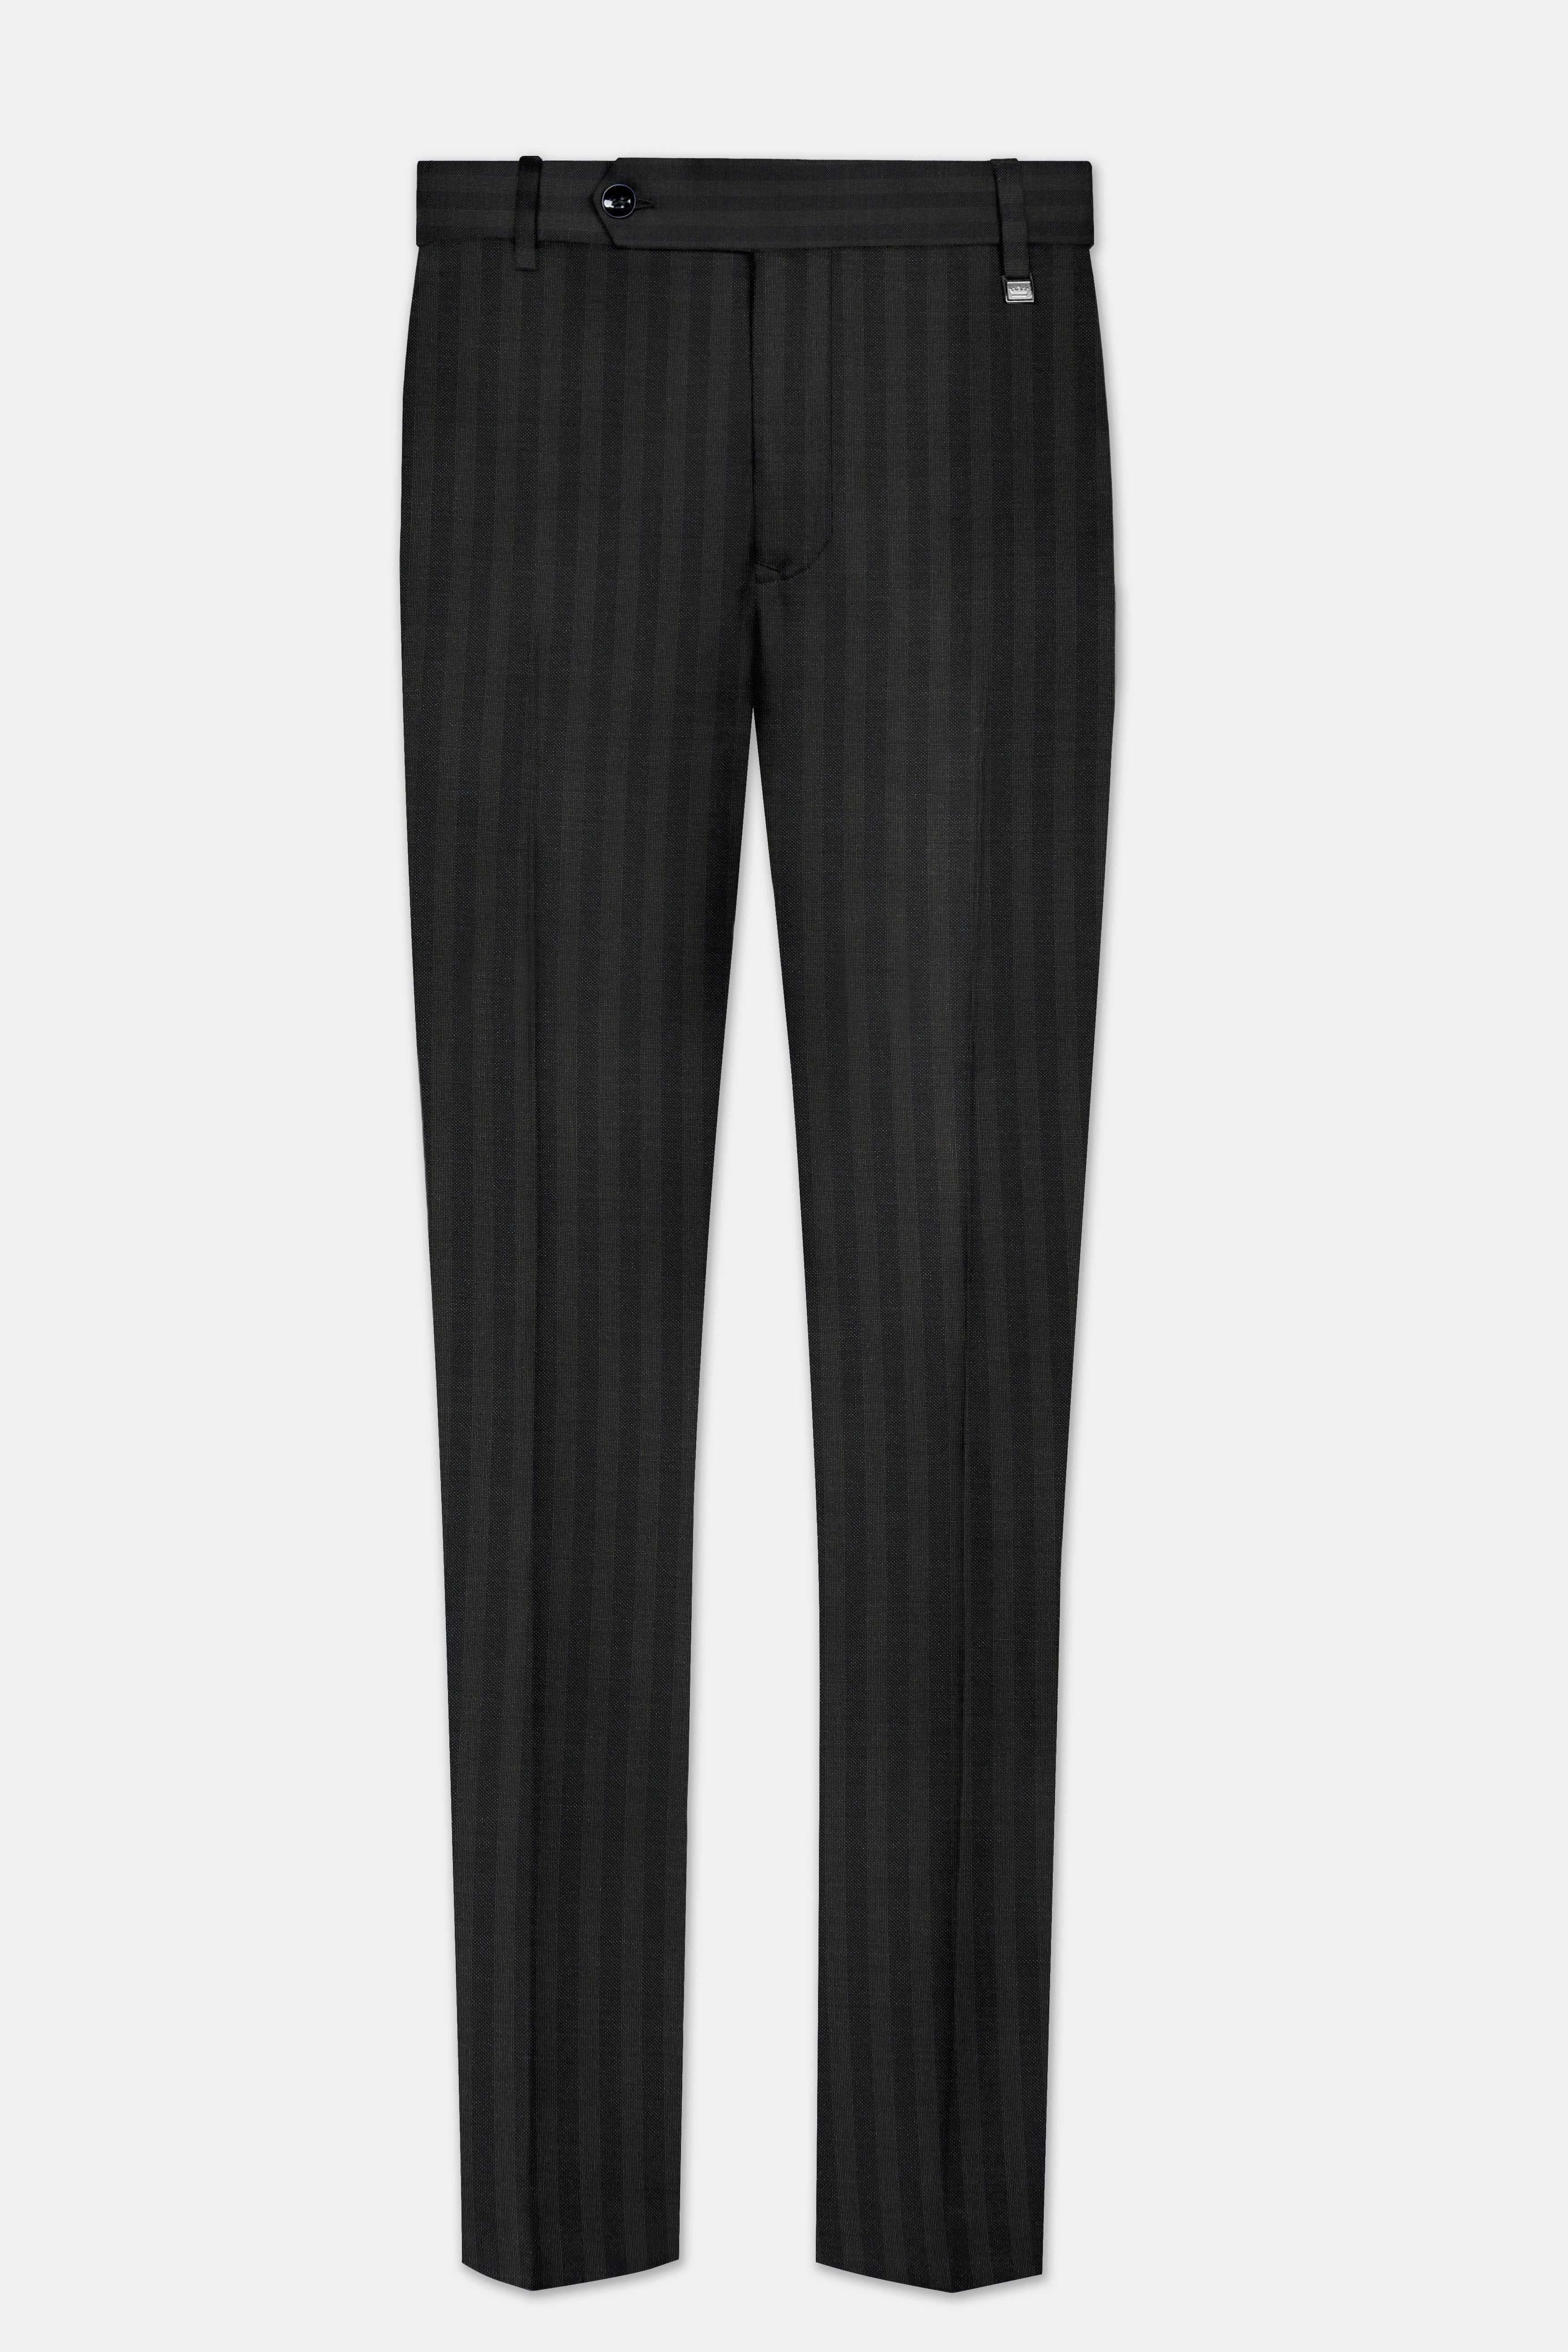 Heavy Green with Black Striped Wool Blend Suit